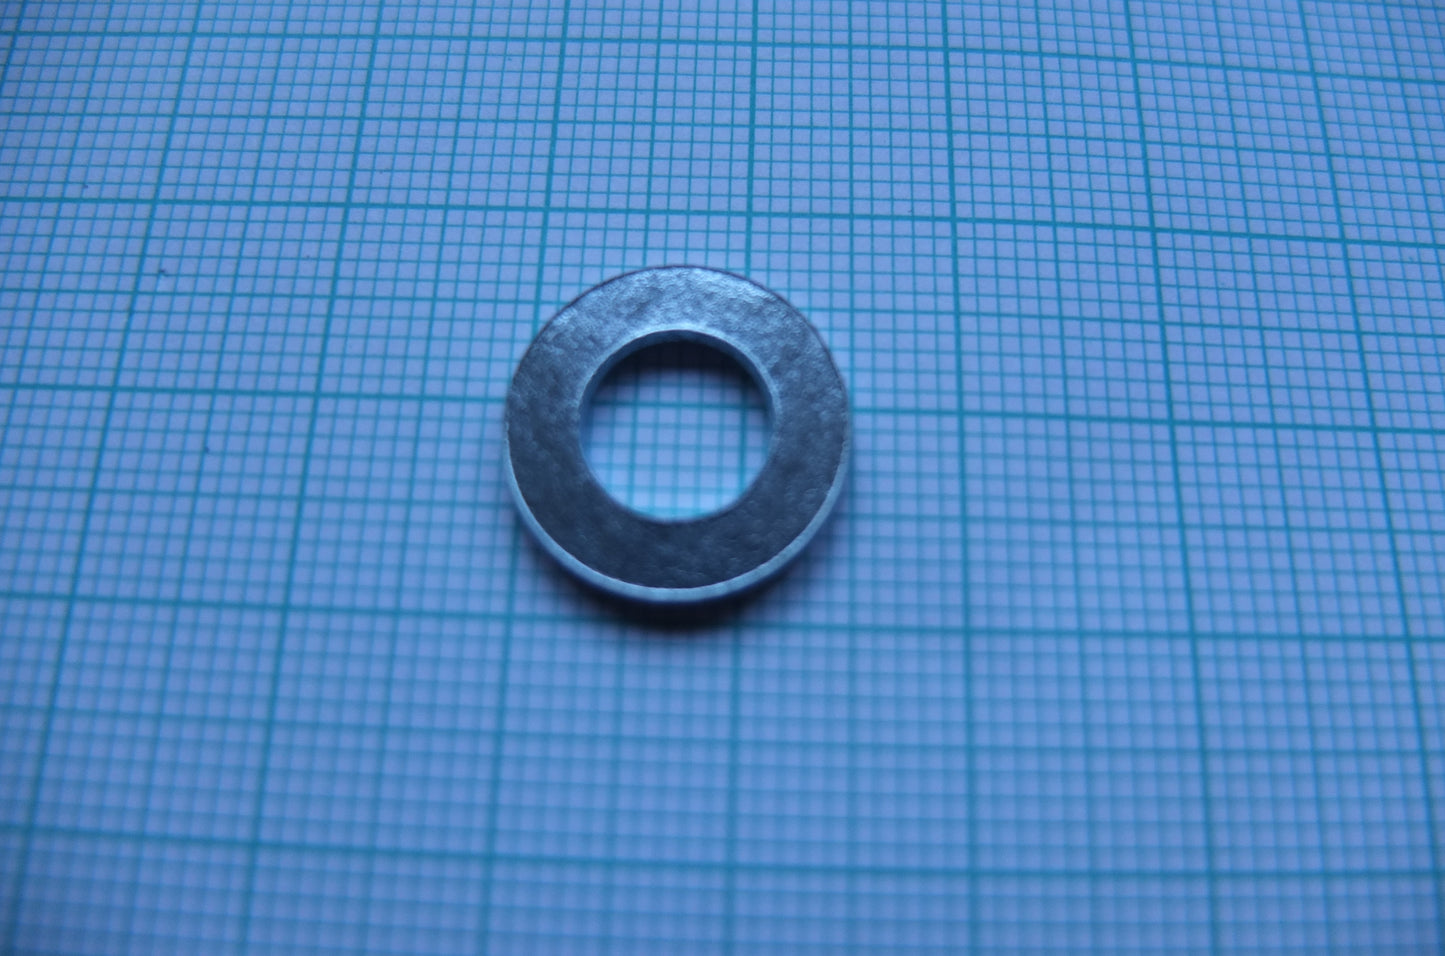 P6/032 Spacer Washer